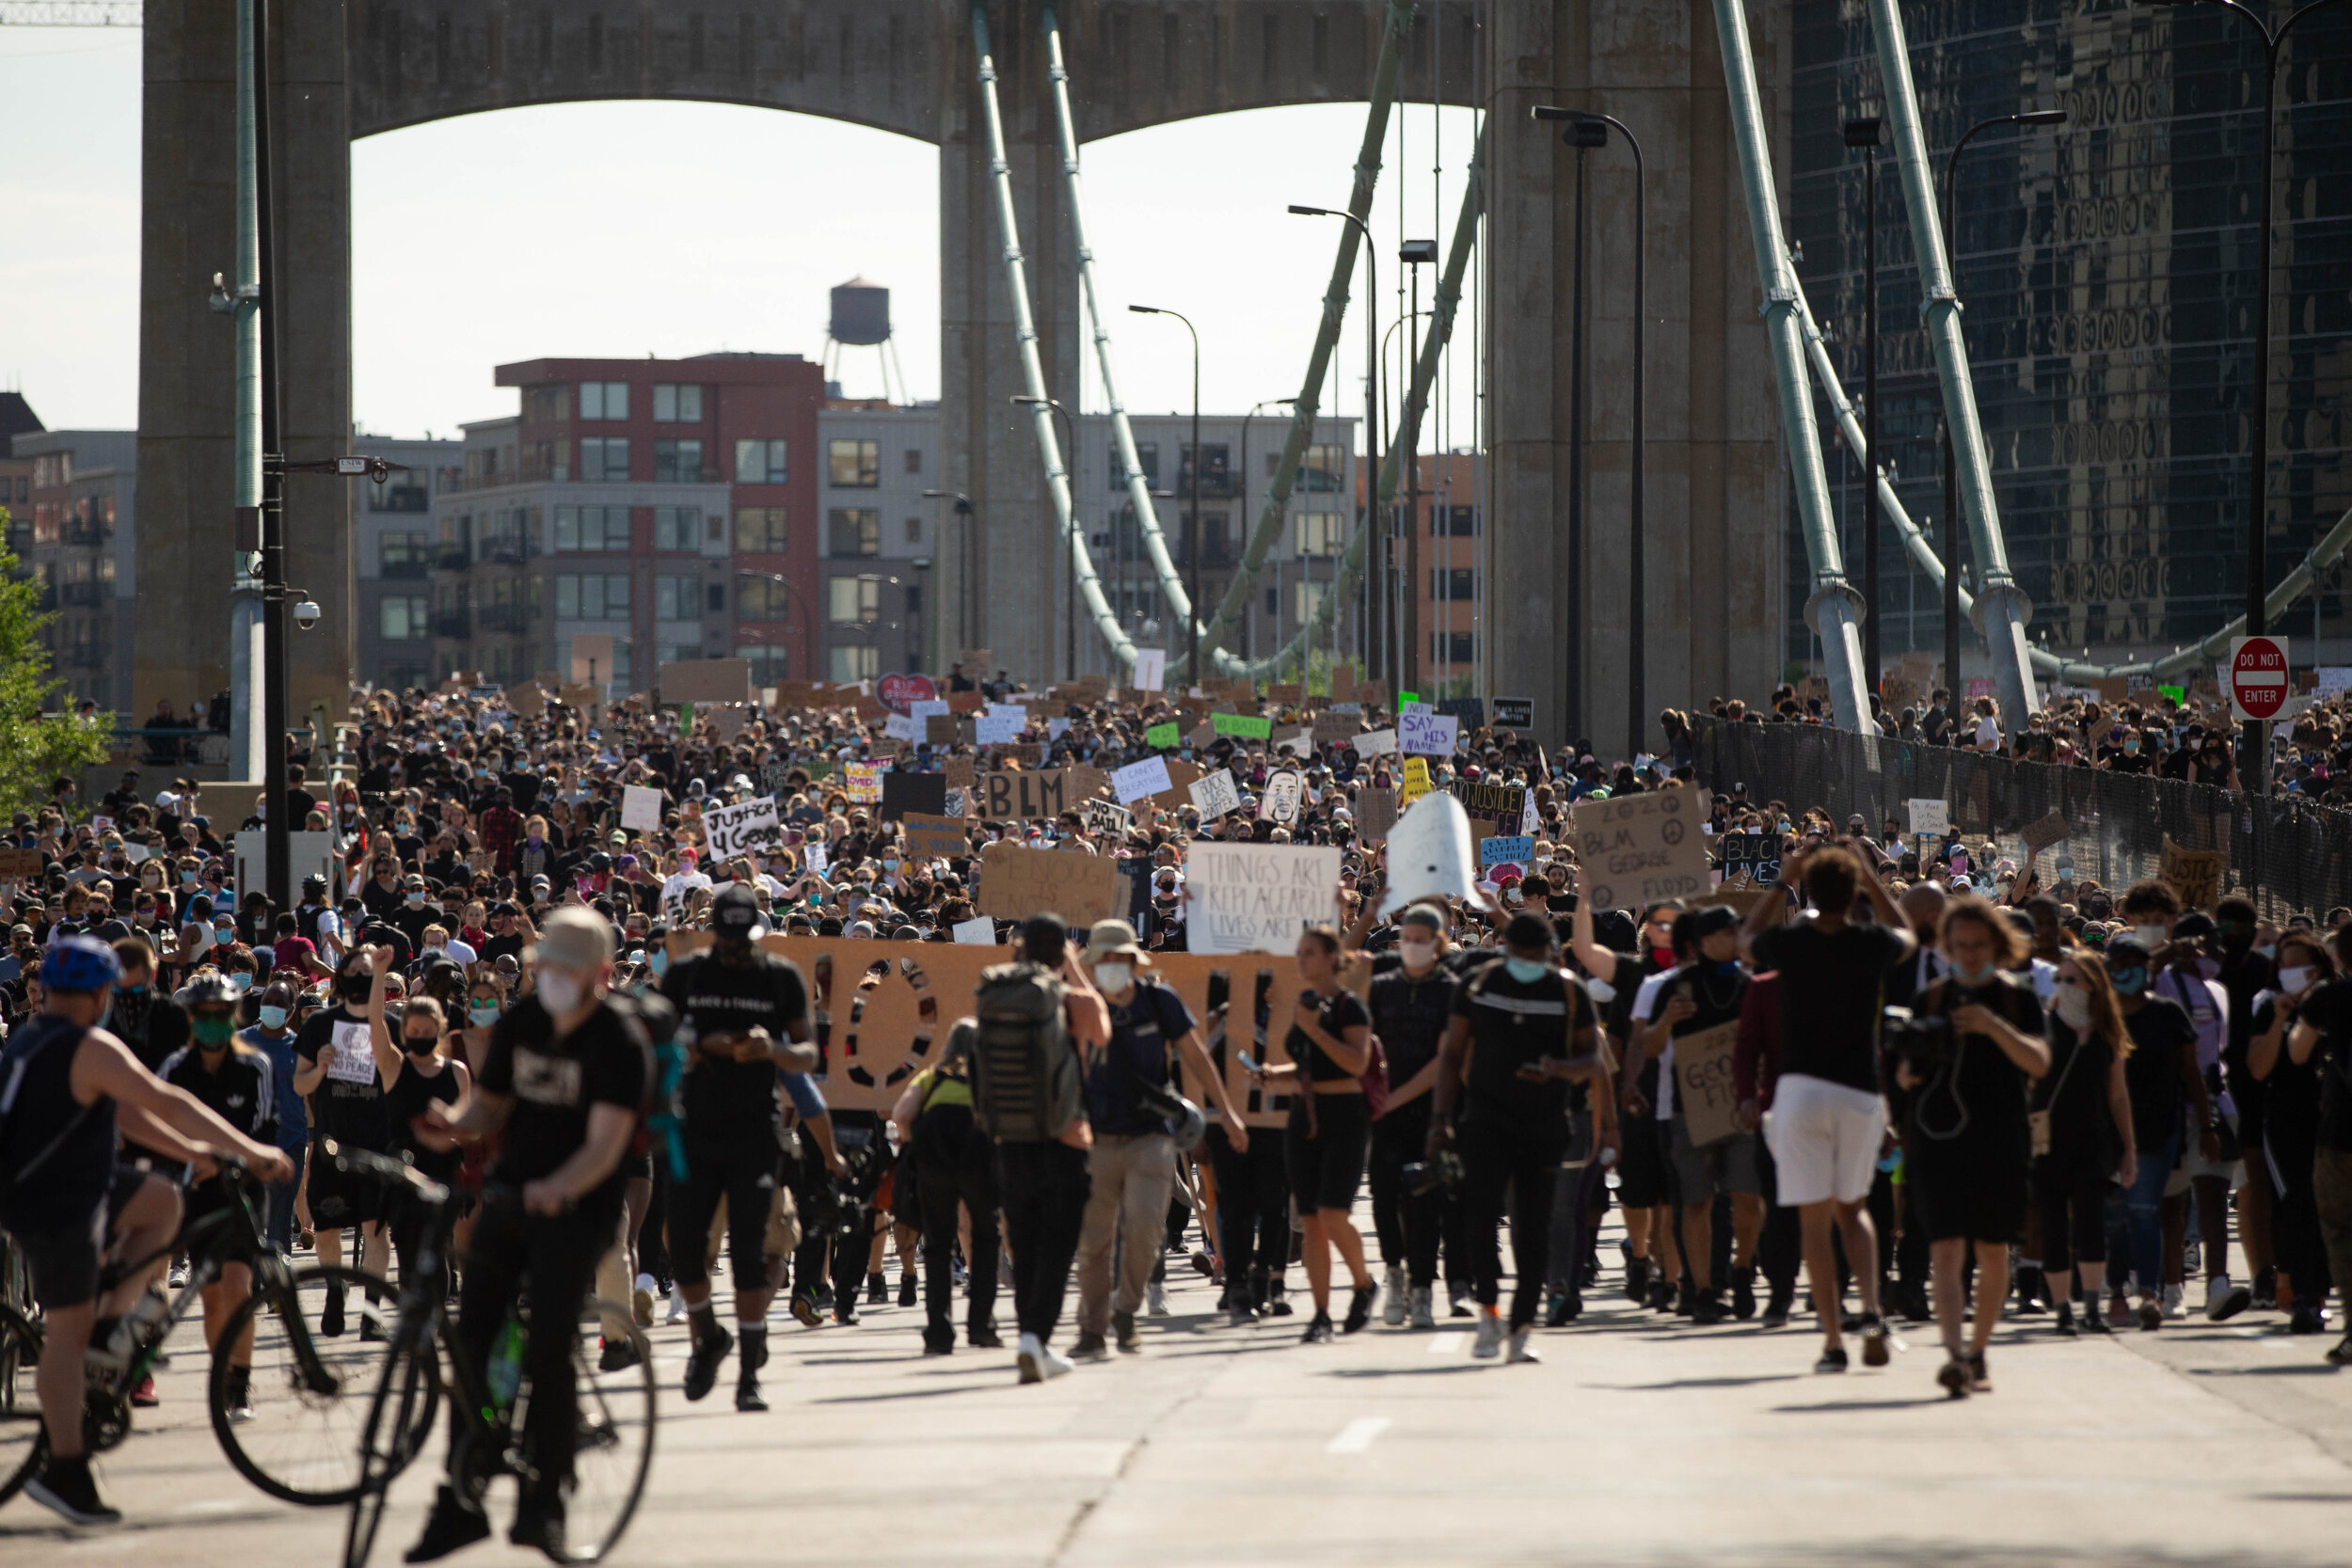  Protesters on the Washington Avenue Bridge in Minneapolis, Minnesota march off of it, eventually making their way to intersate 35W during a protest over the police killing of George Floyd in Minneapolis, Minnesota on May 31, 2020. Chris Juhn/Zenger 